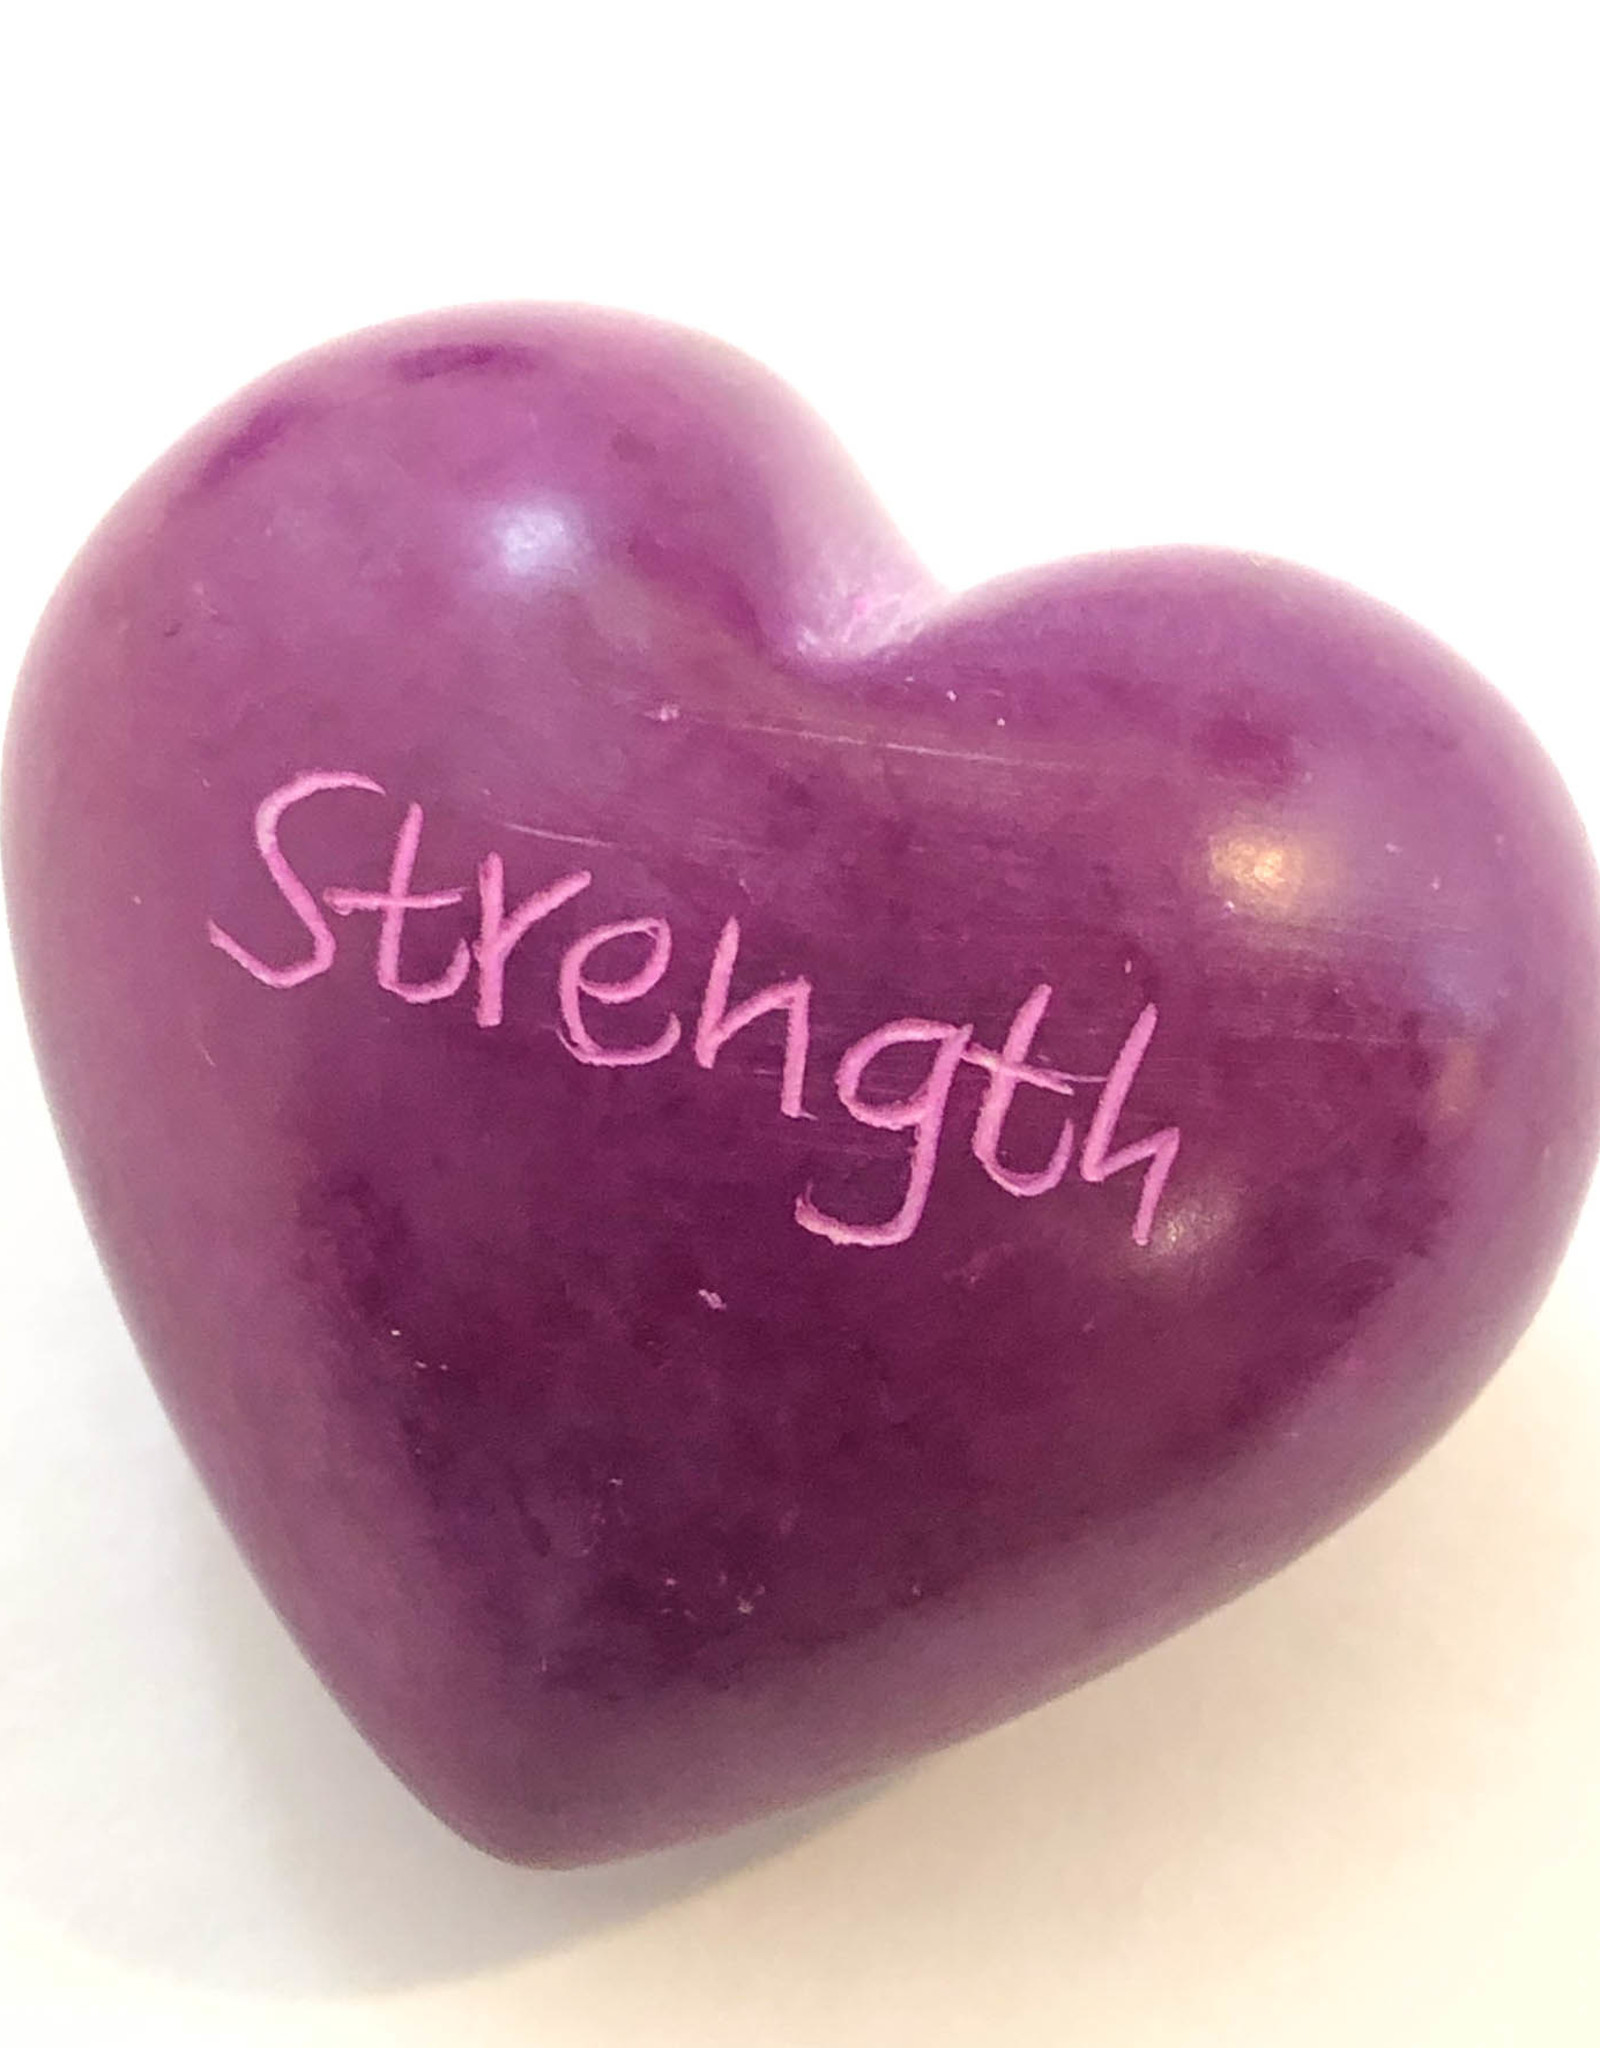 Venture Imports Word Hearts - Strength, Pink